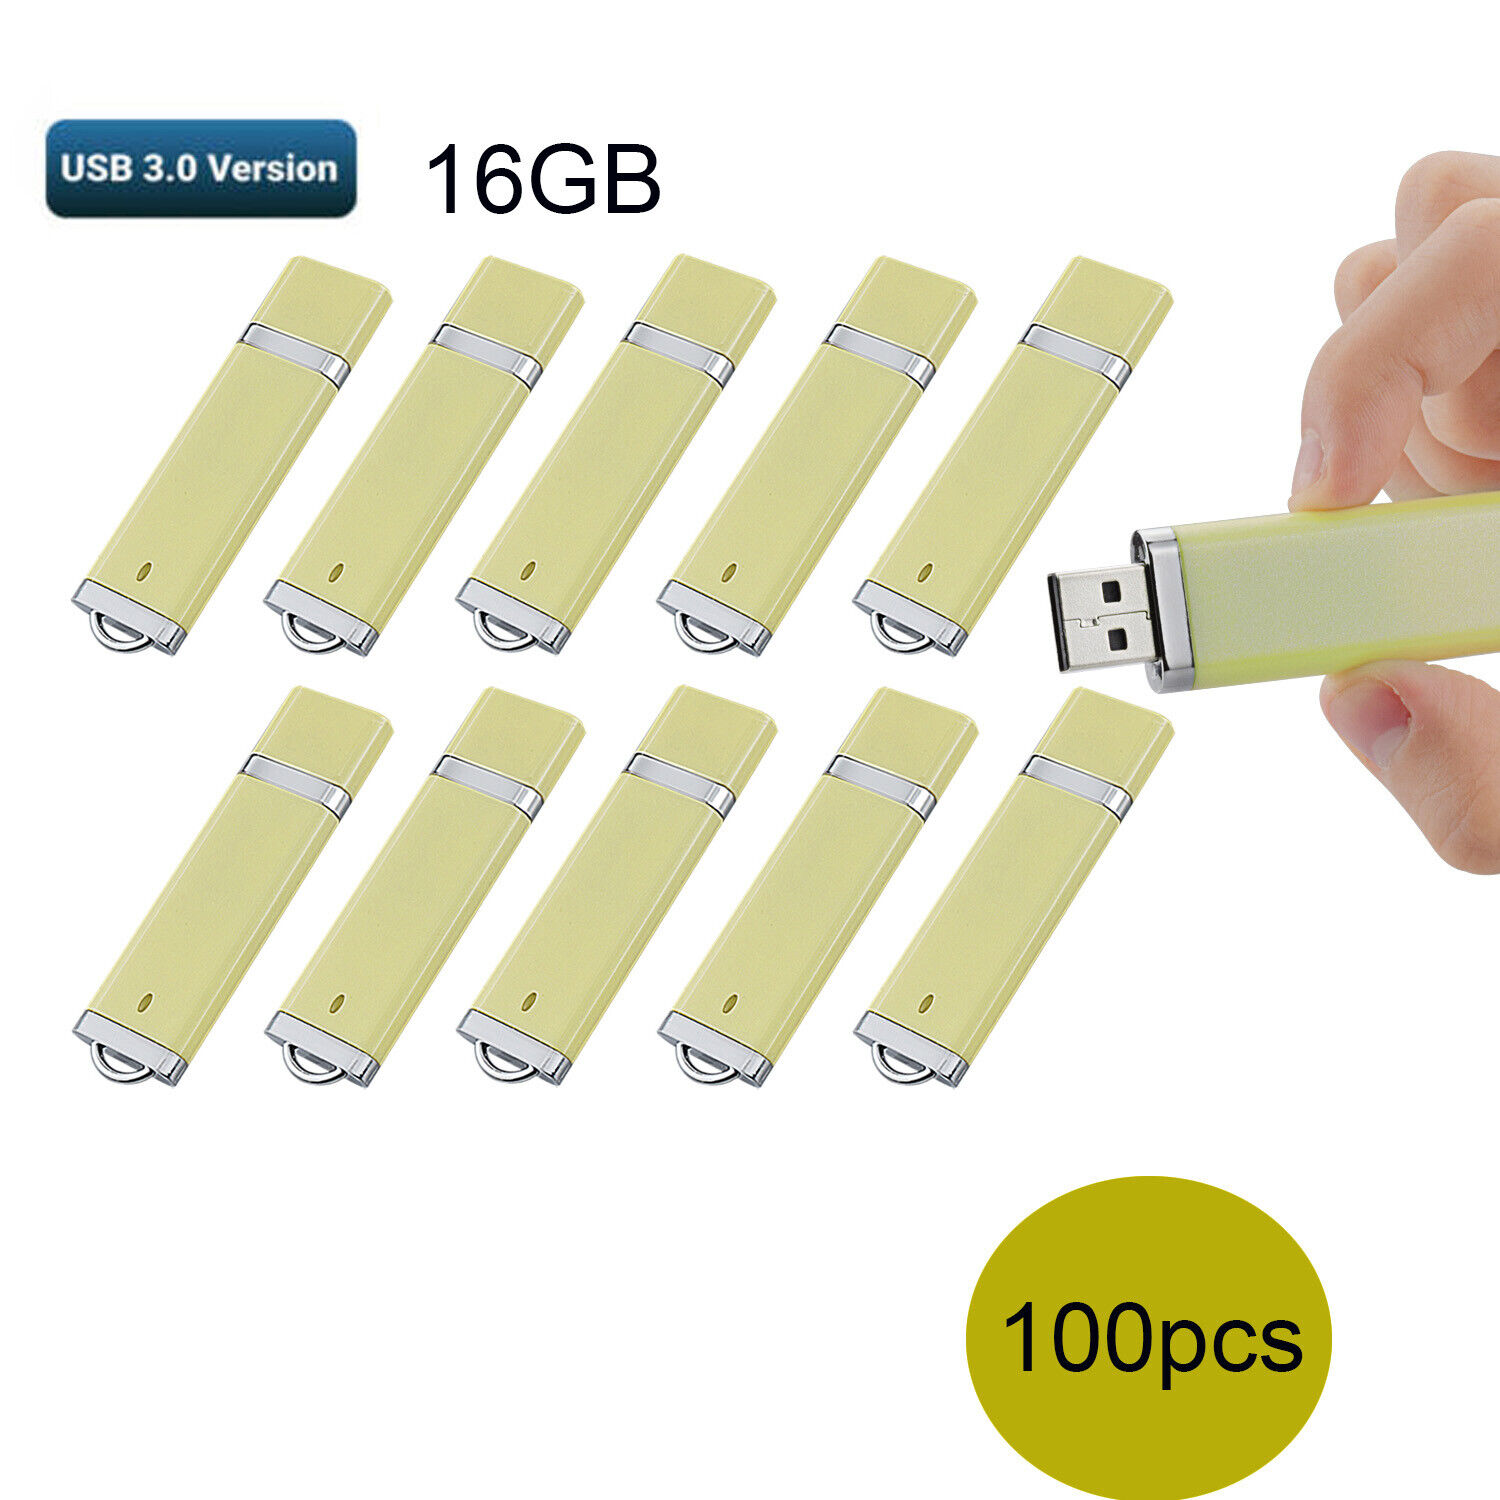 High Speed 100 Pack USB 3.0 16GB Memory Sticks USB Flash Drives For PC Laptop us